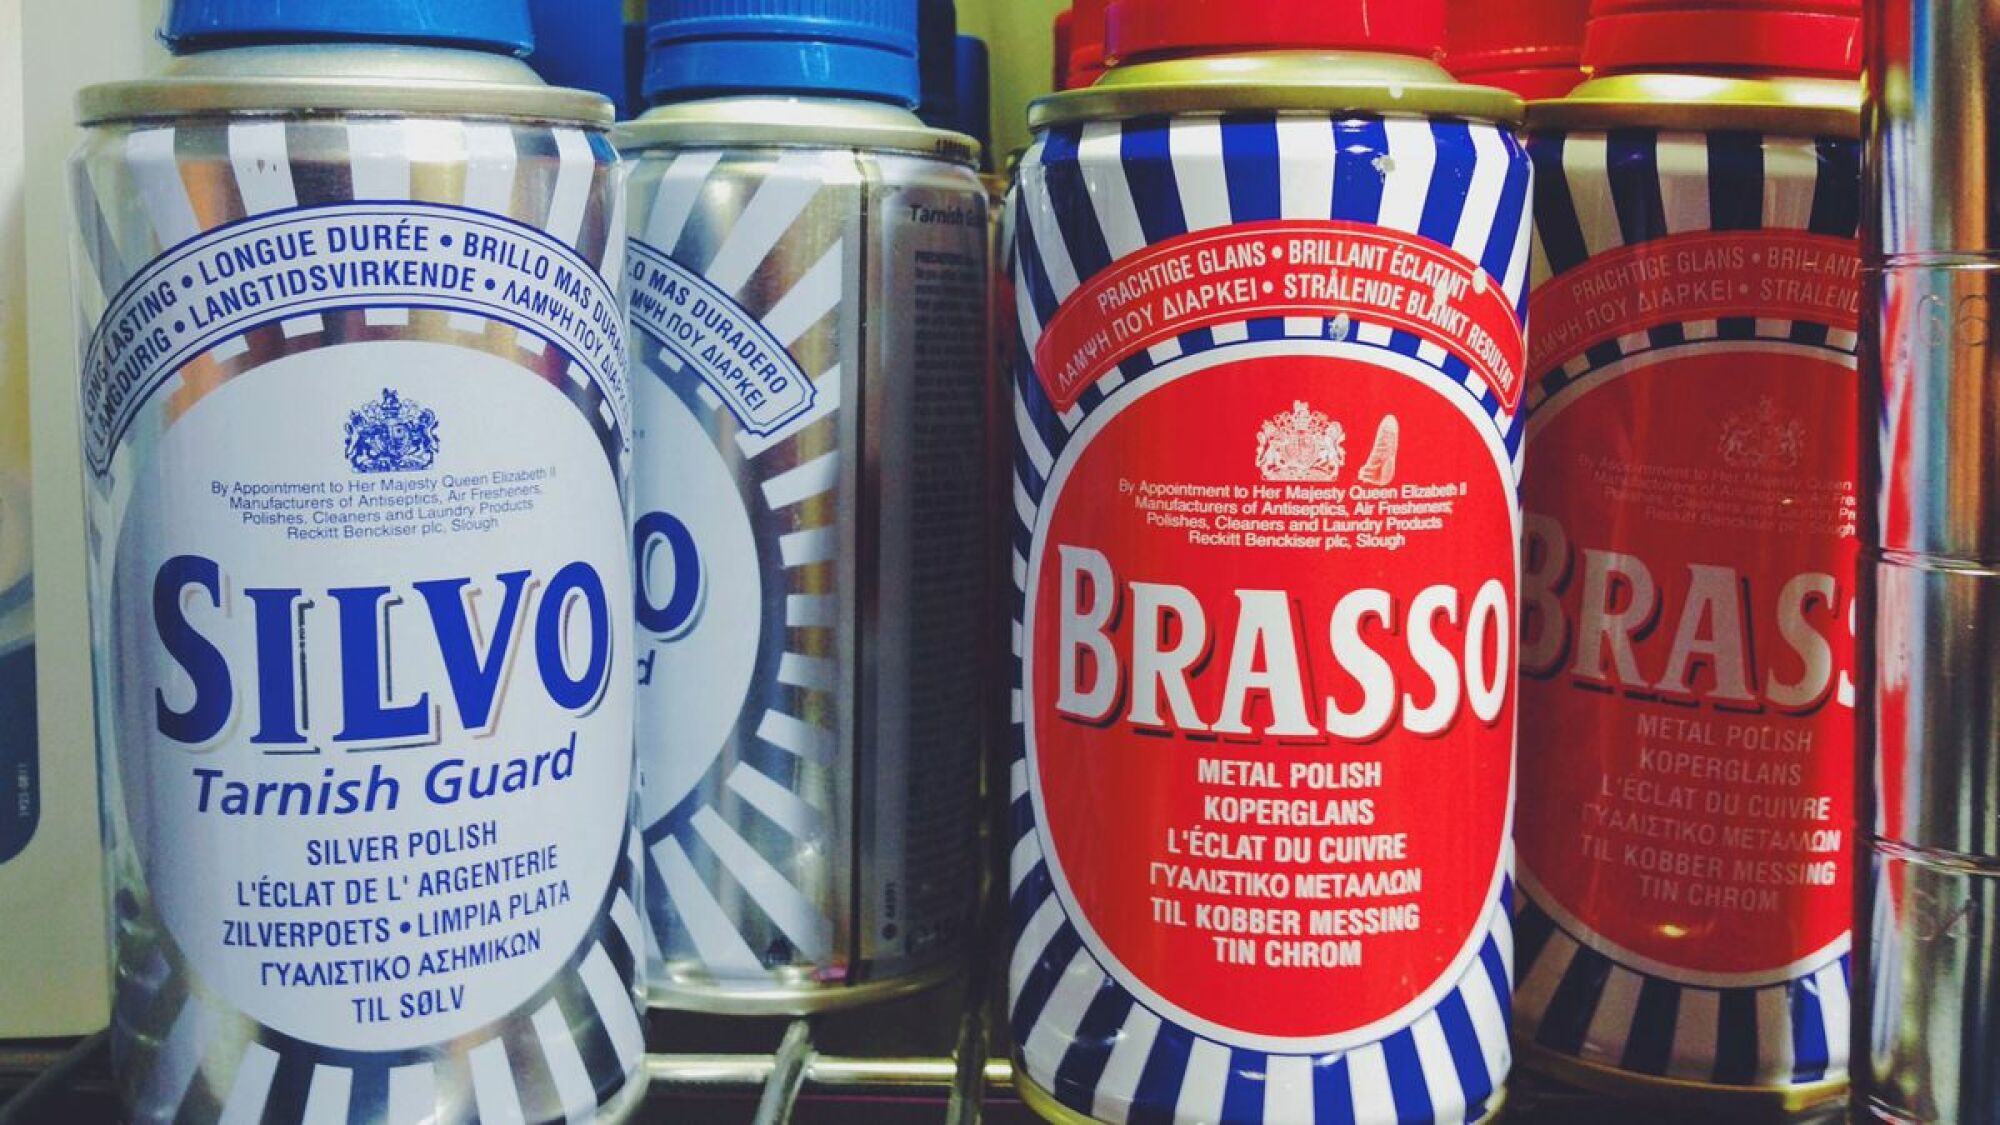 Cans of Brasso and Silvo.